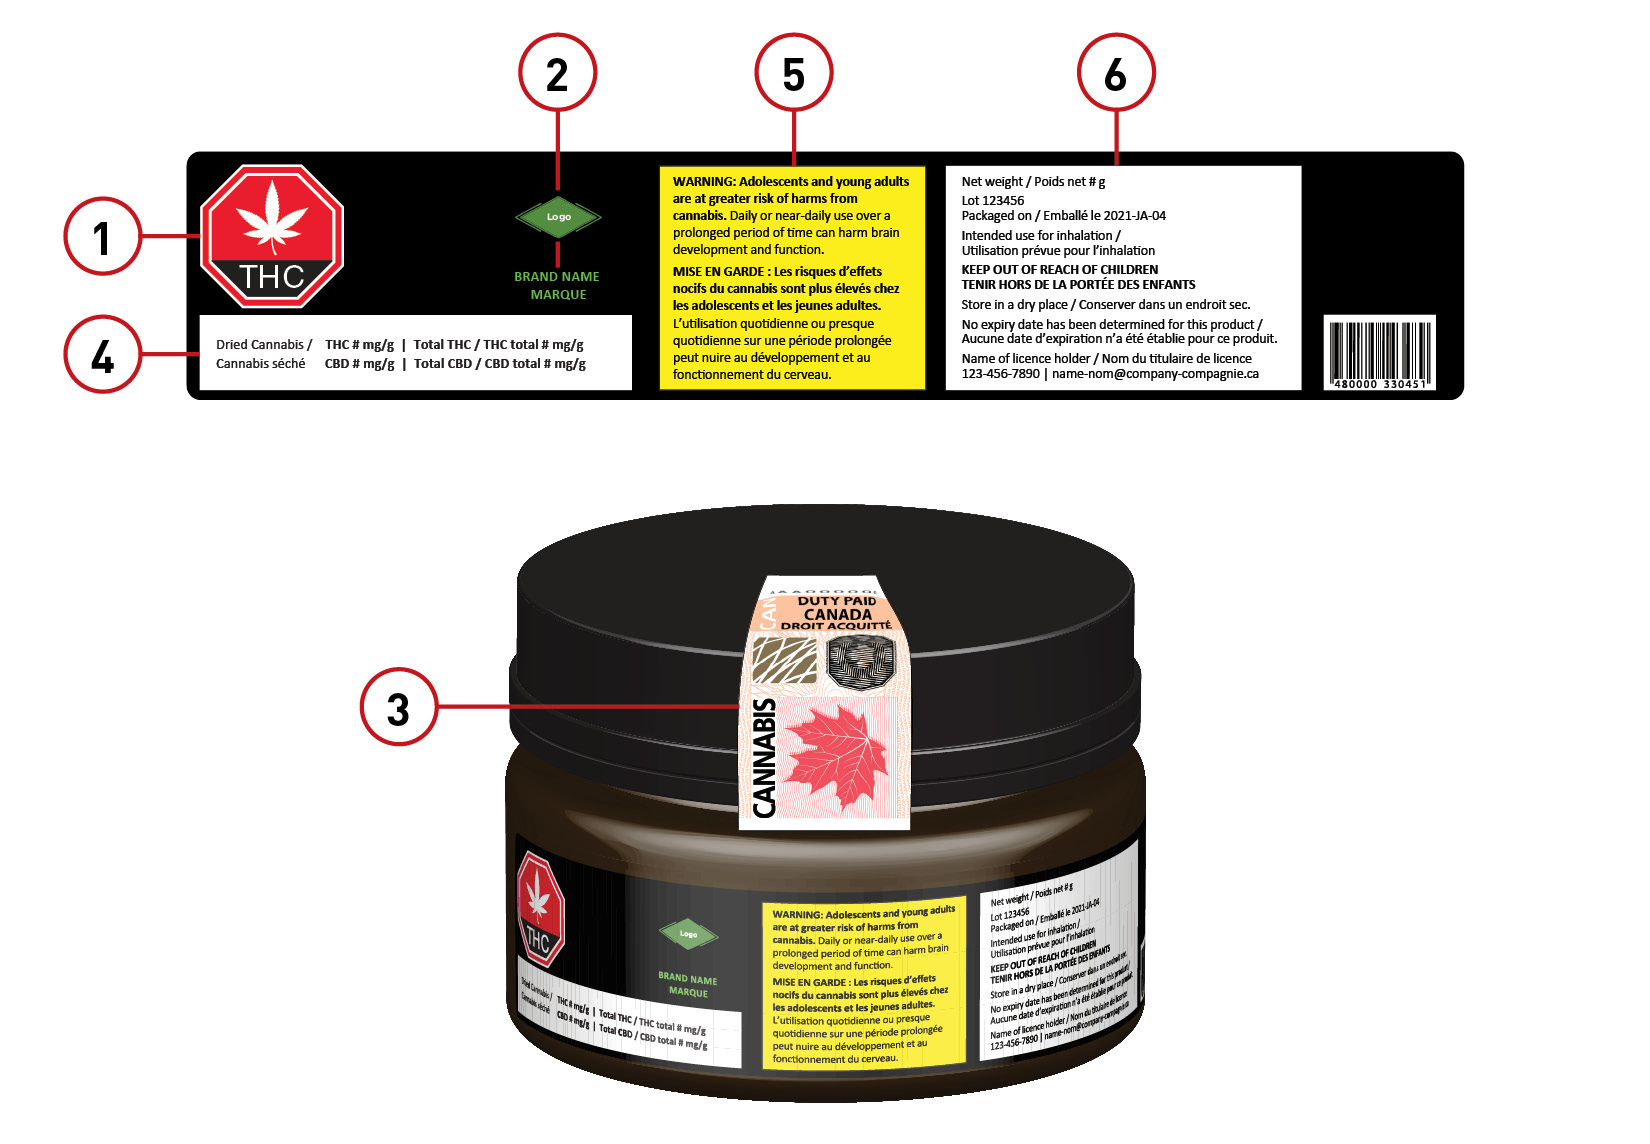 Cannabis Packaging Canada - Packaging Labelling Requirements